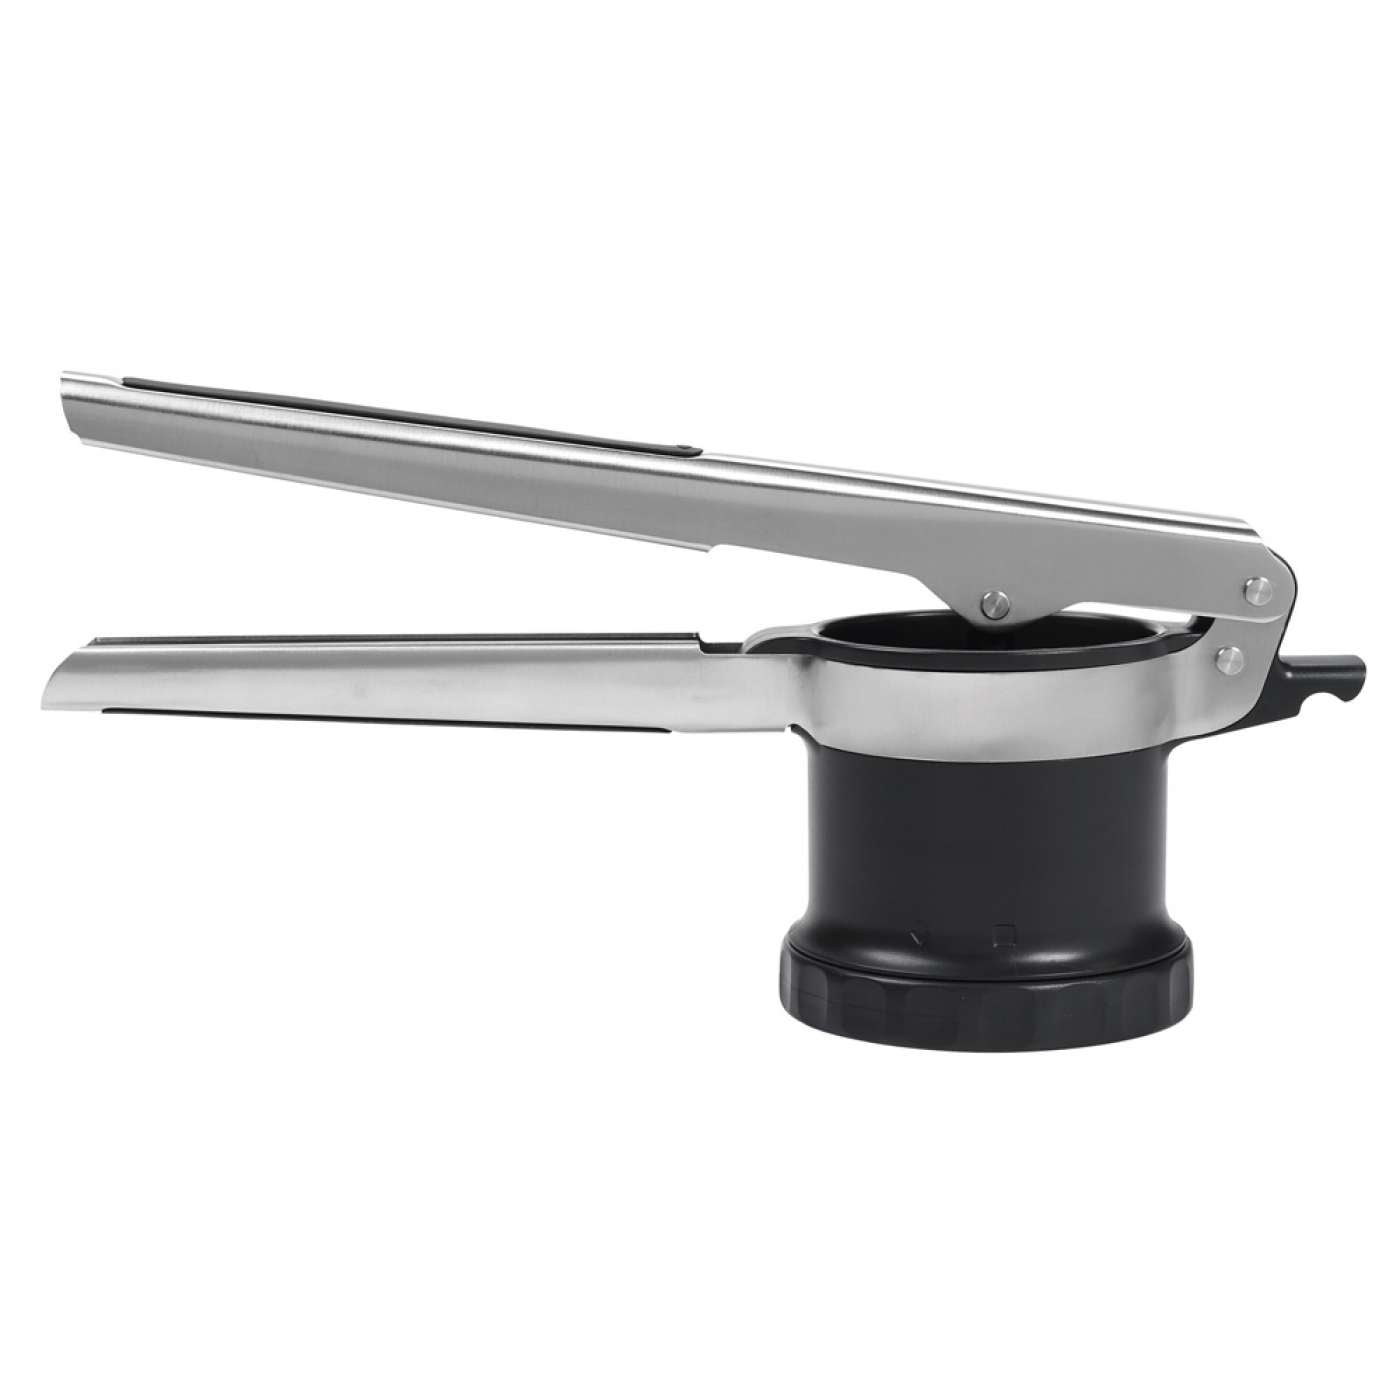 OXO Good Grips Durable Stainless Steel Potato Ricer Puree Press